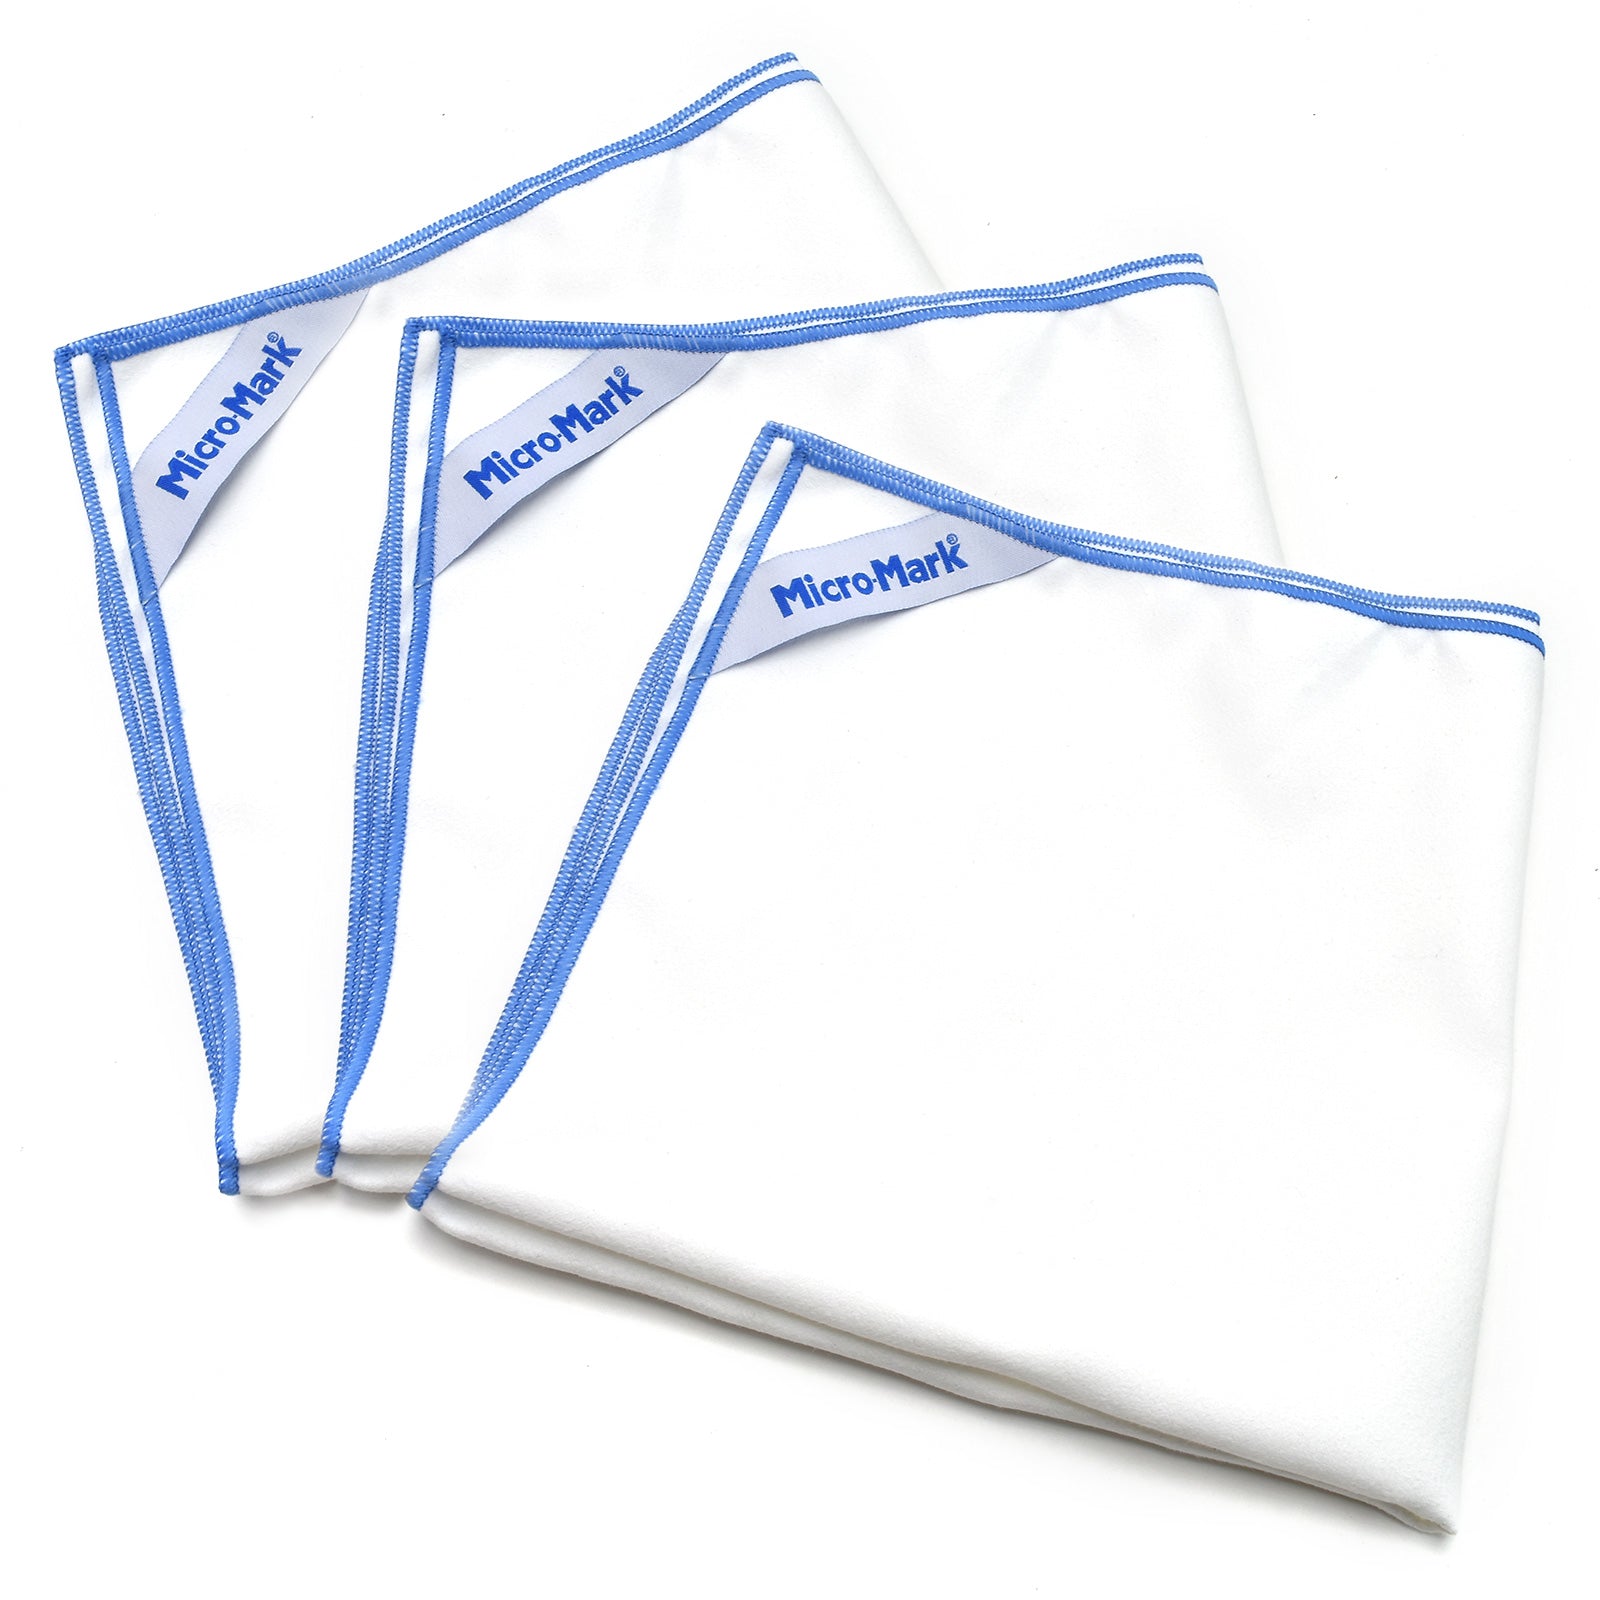 Micro - Mark Performance - Pro Microfiber Cleaning & Polishing Cloths, Pack of 3 - Micro - Mark Scale Model Accessories